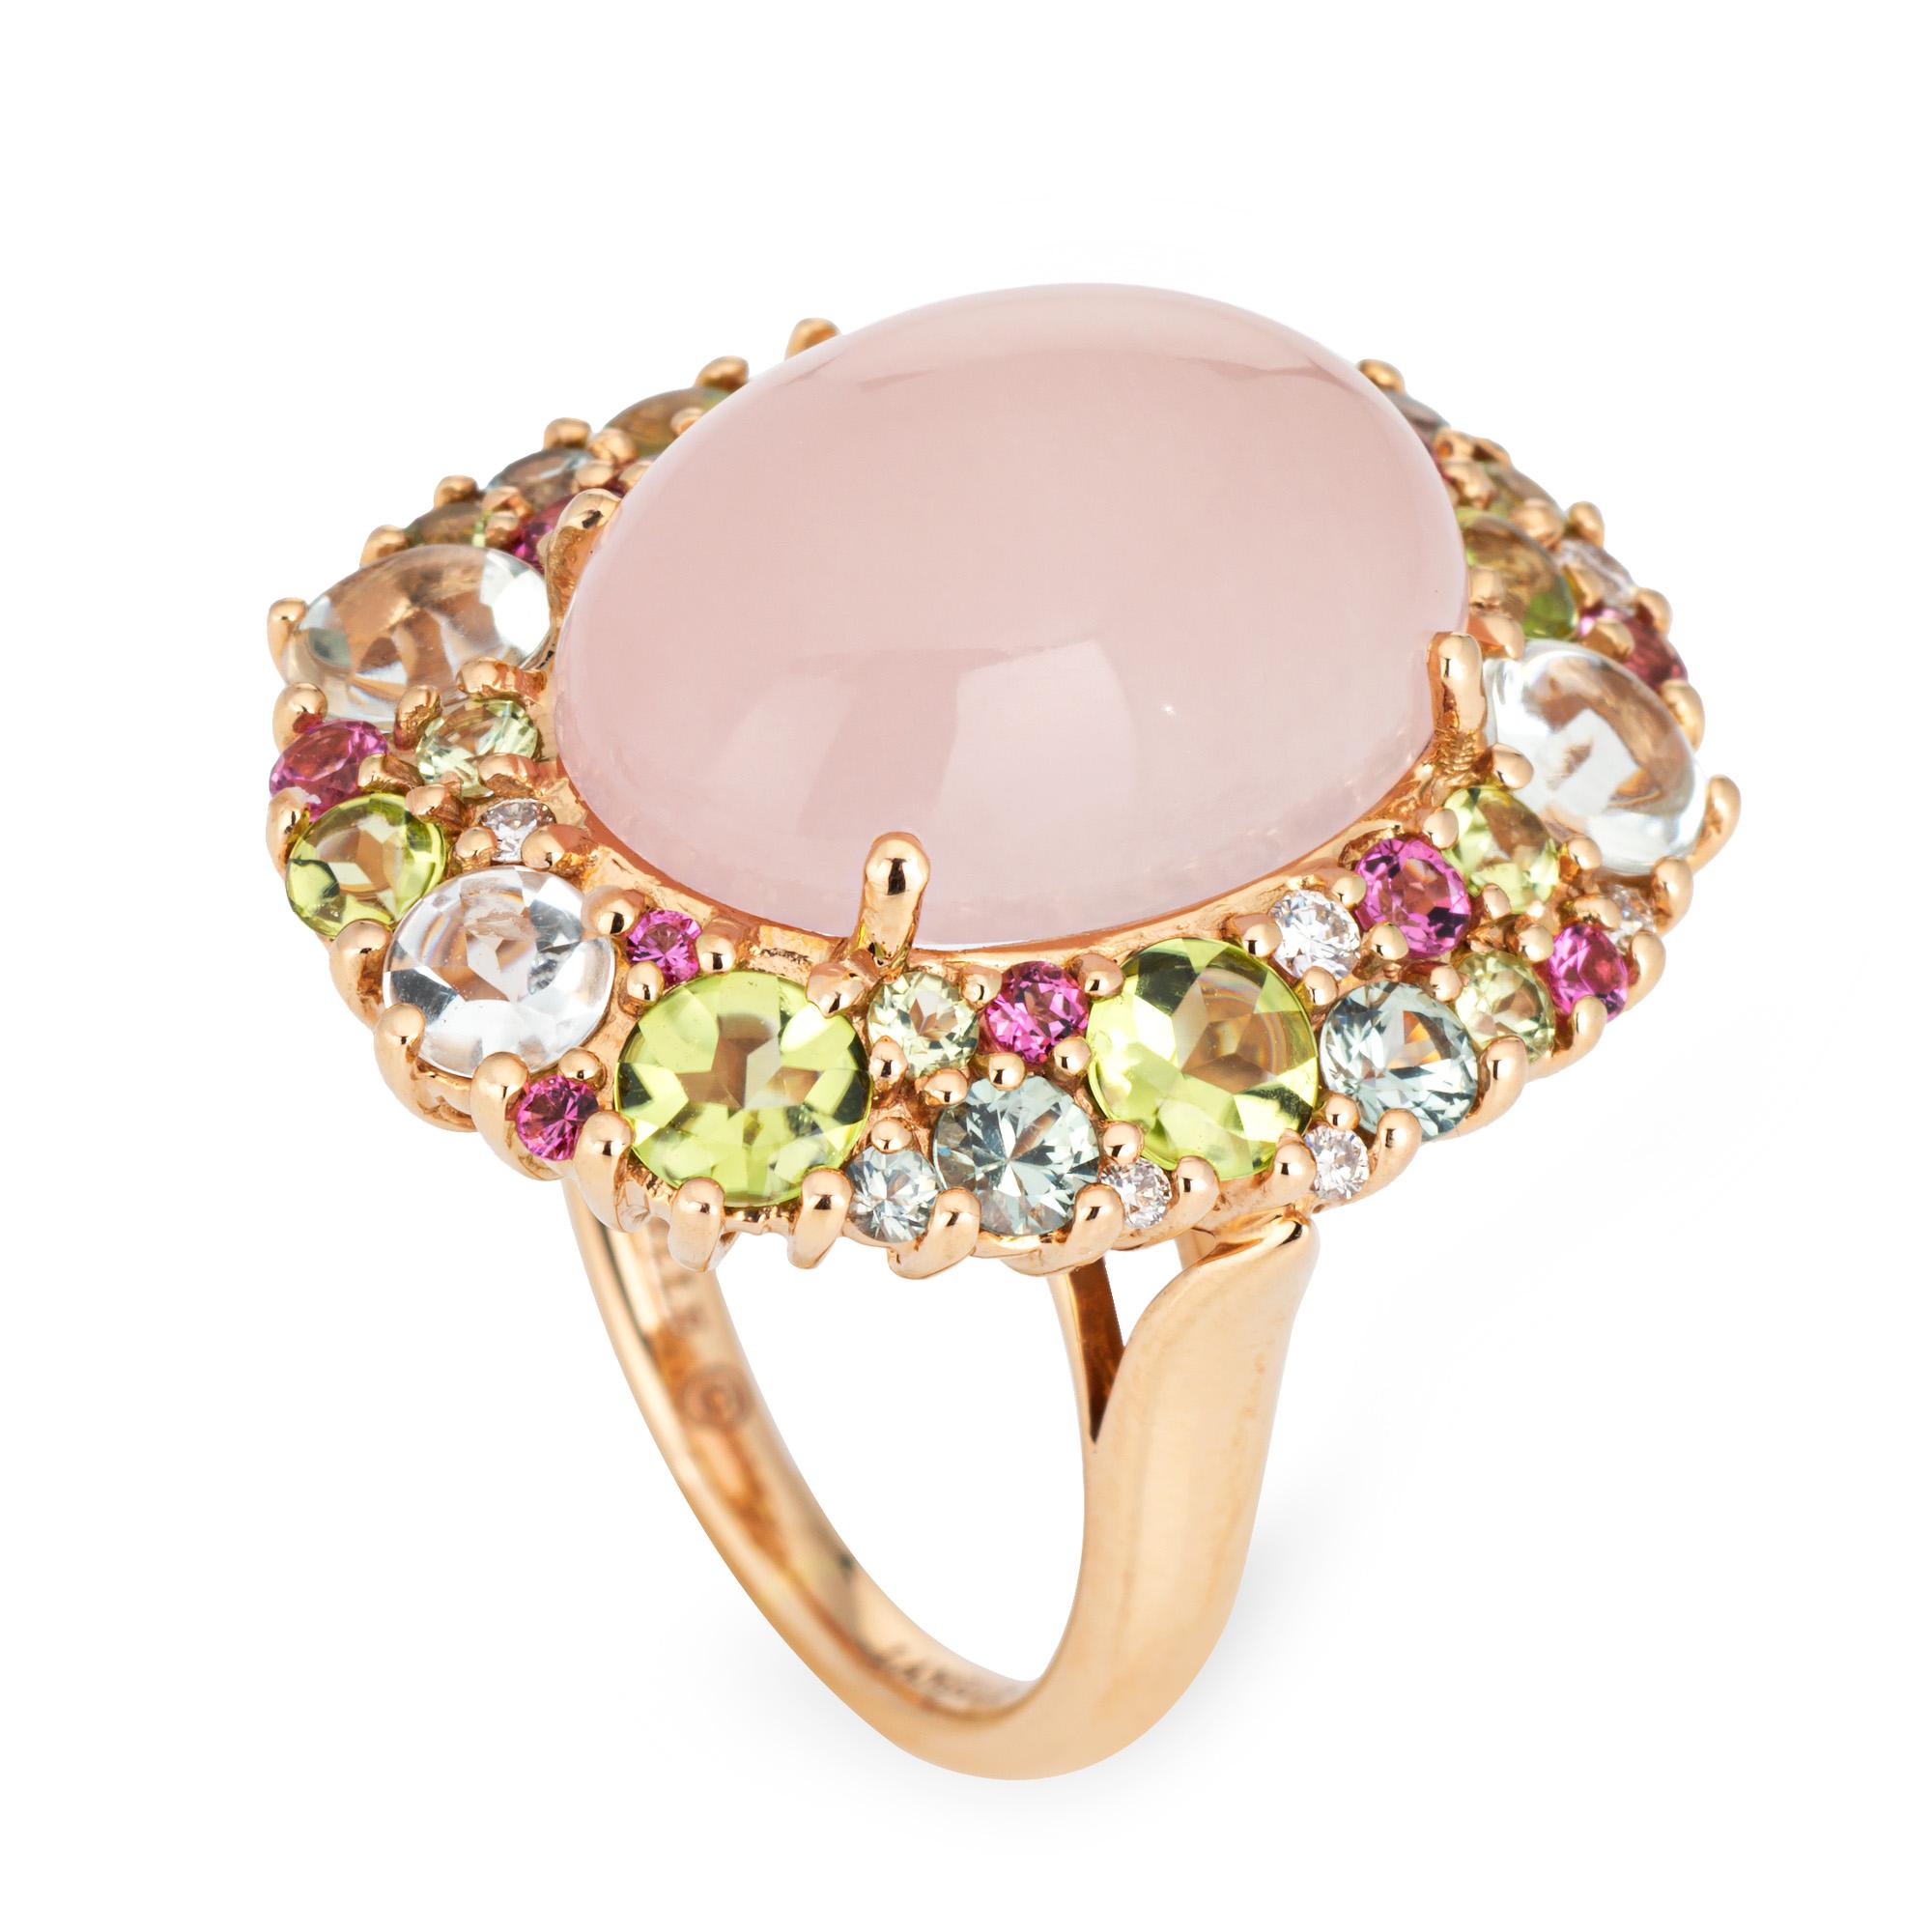 Stylish pre-owned Isabelle Langlois cocktail ring crafted in 18 karat rose gold. 

Center set cabochon cut rose quartz measures 18mm x 13mm. Peridot, pink tourmalines, diamond and blue topaz accent the mount. The stones are in very good condition